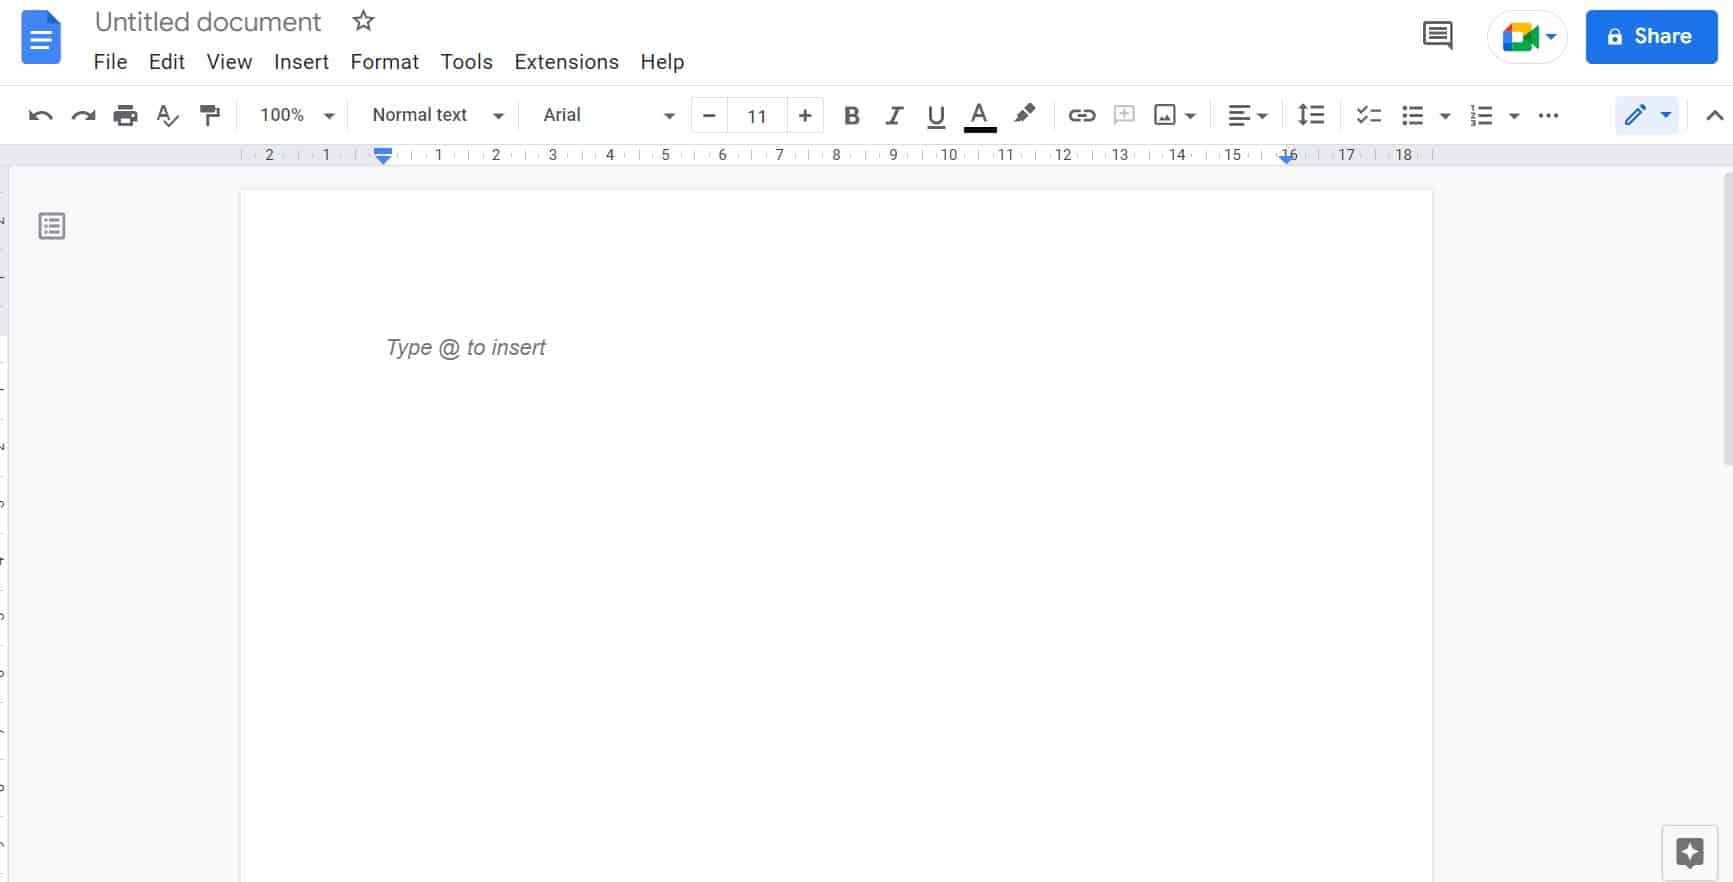 Google Docs' document editor is like an entire word processing tool, complete with toolbars, rulers and page layouts, and more.